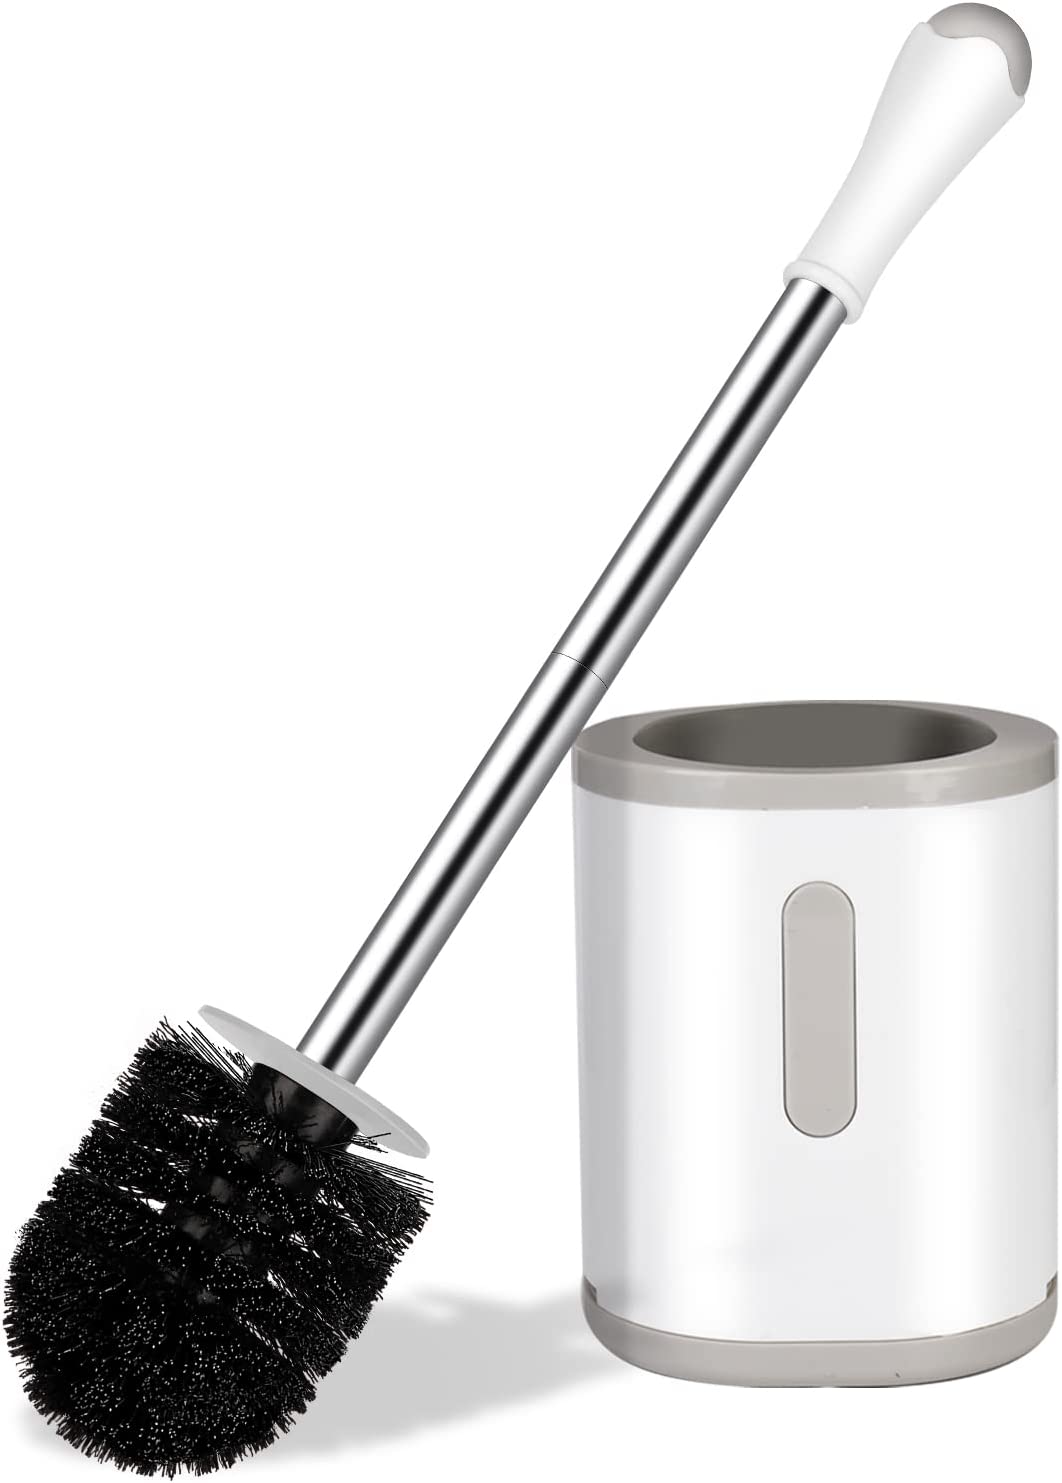 Toilet Brush and Holder, Compact Size Toilet Bowl [...]